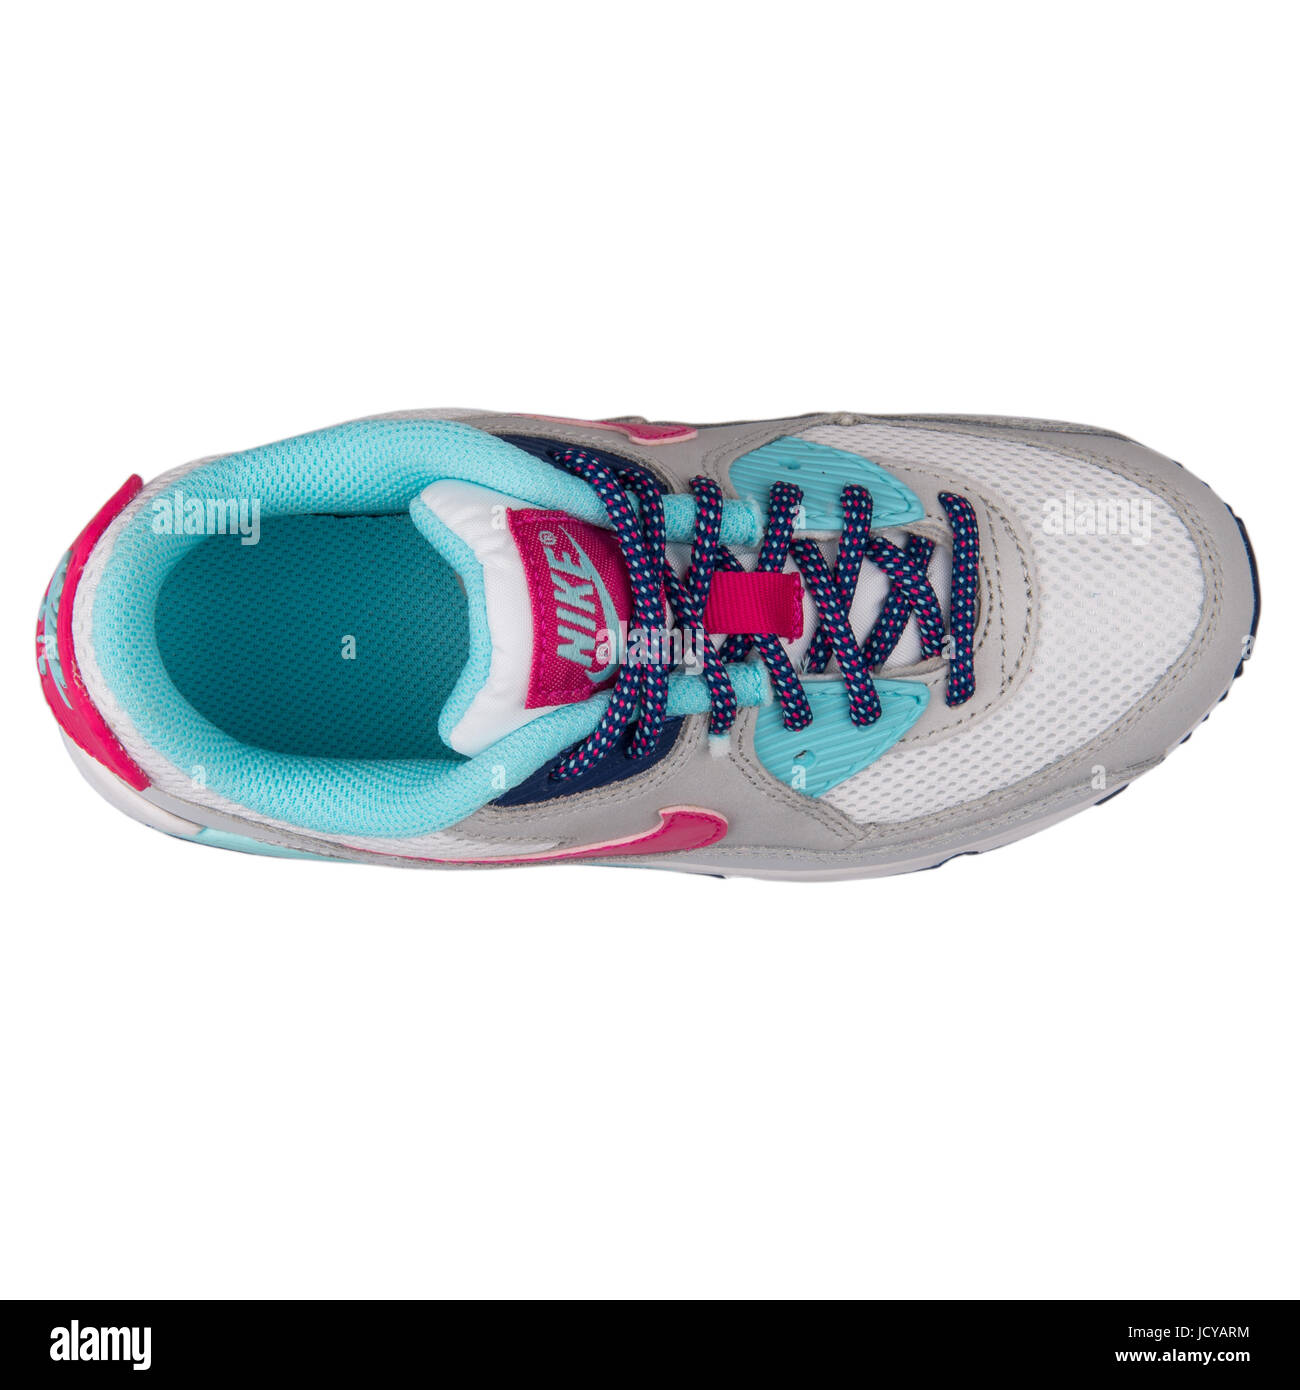 Nike Air Max 90 mesh (PS) Blanc, Gris, Rose et Turquoise Kids chaussures  running - 724856-102 Photo Stock - Alamy